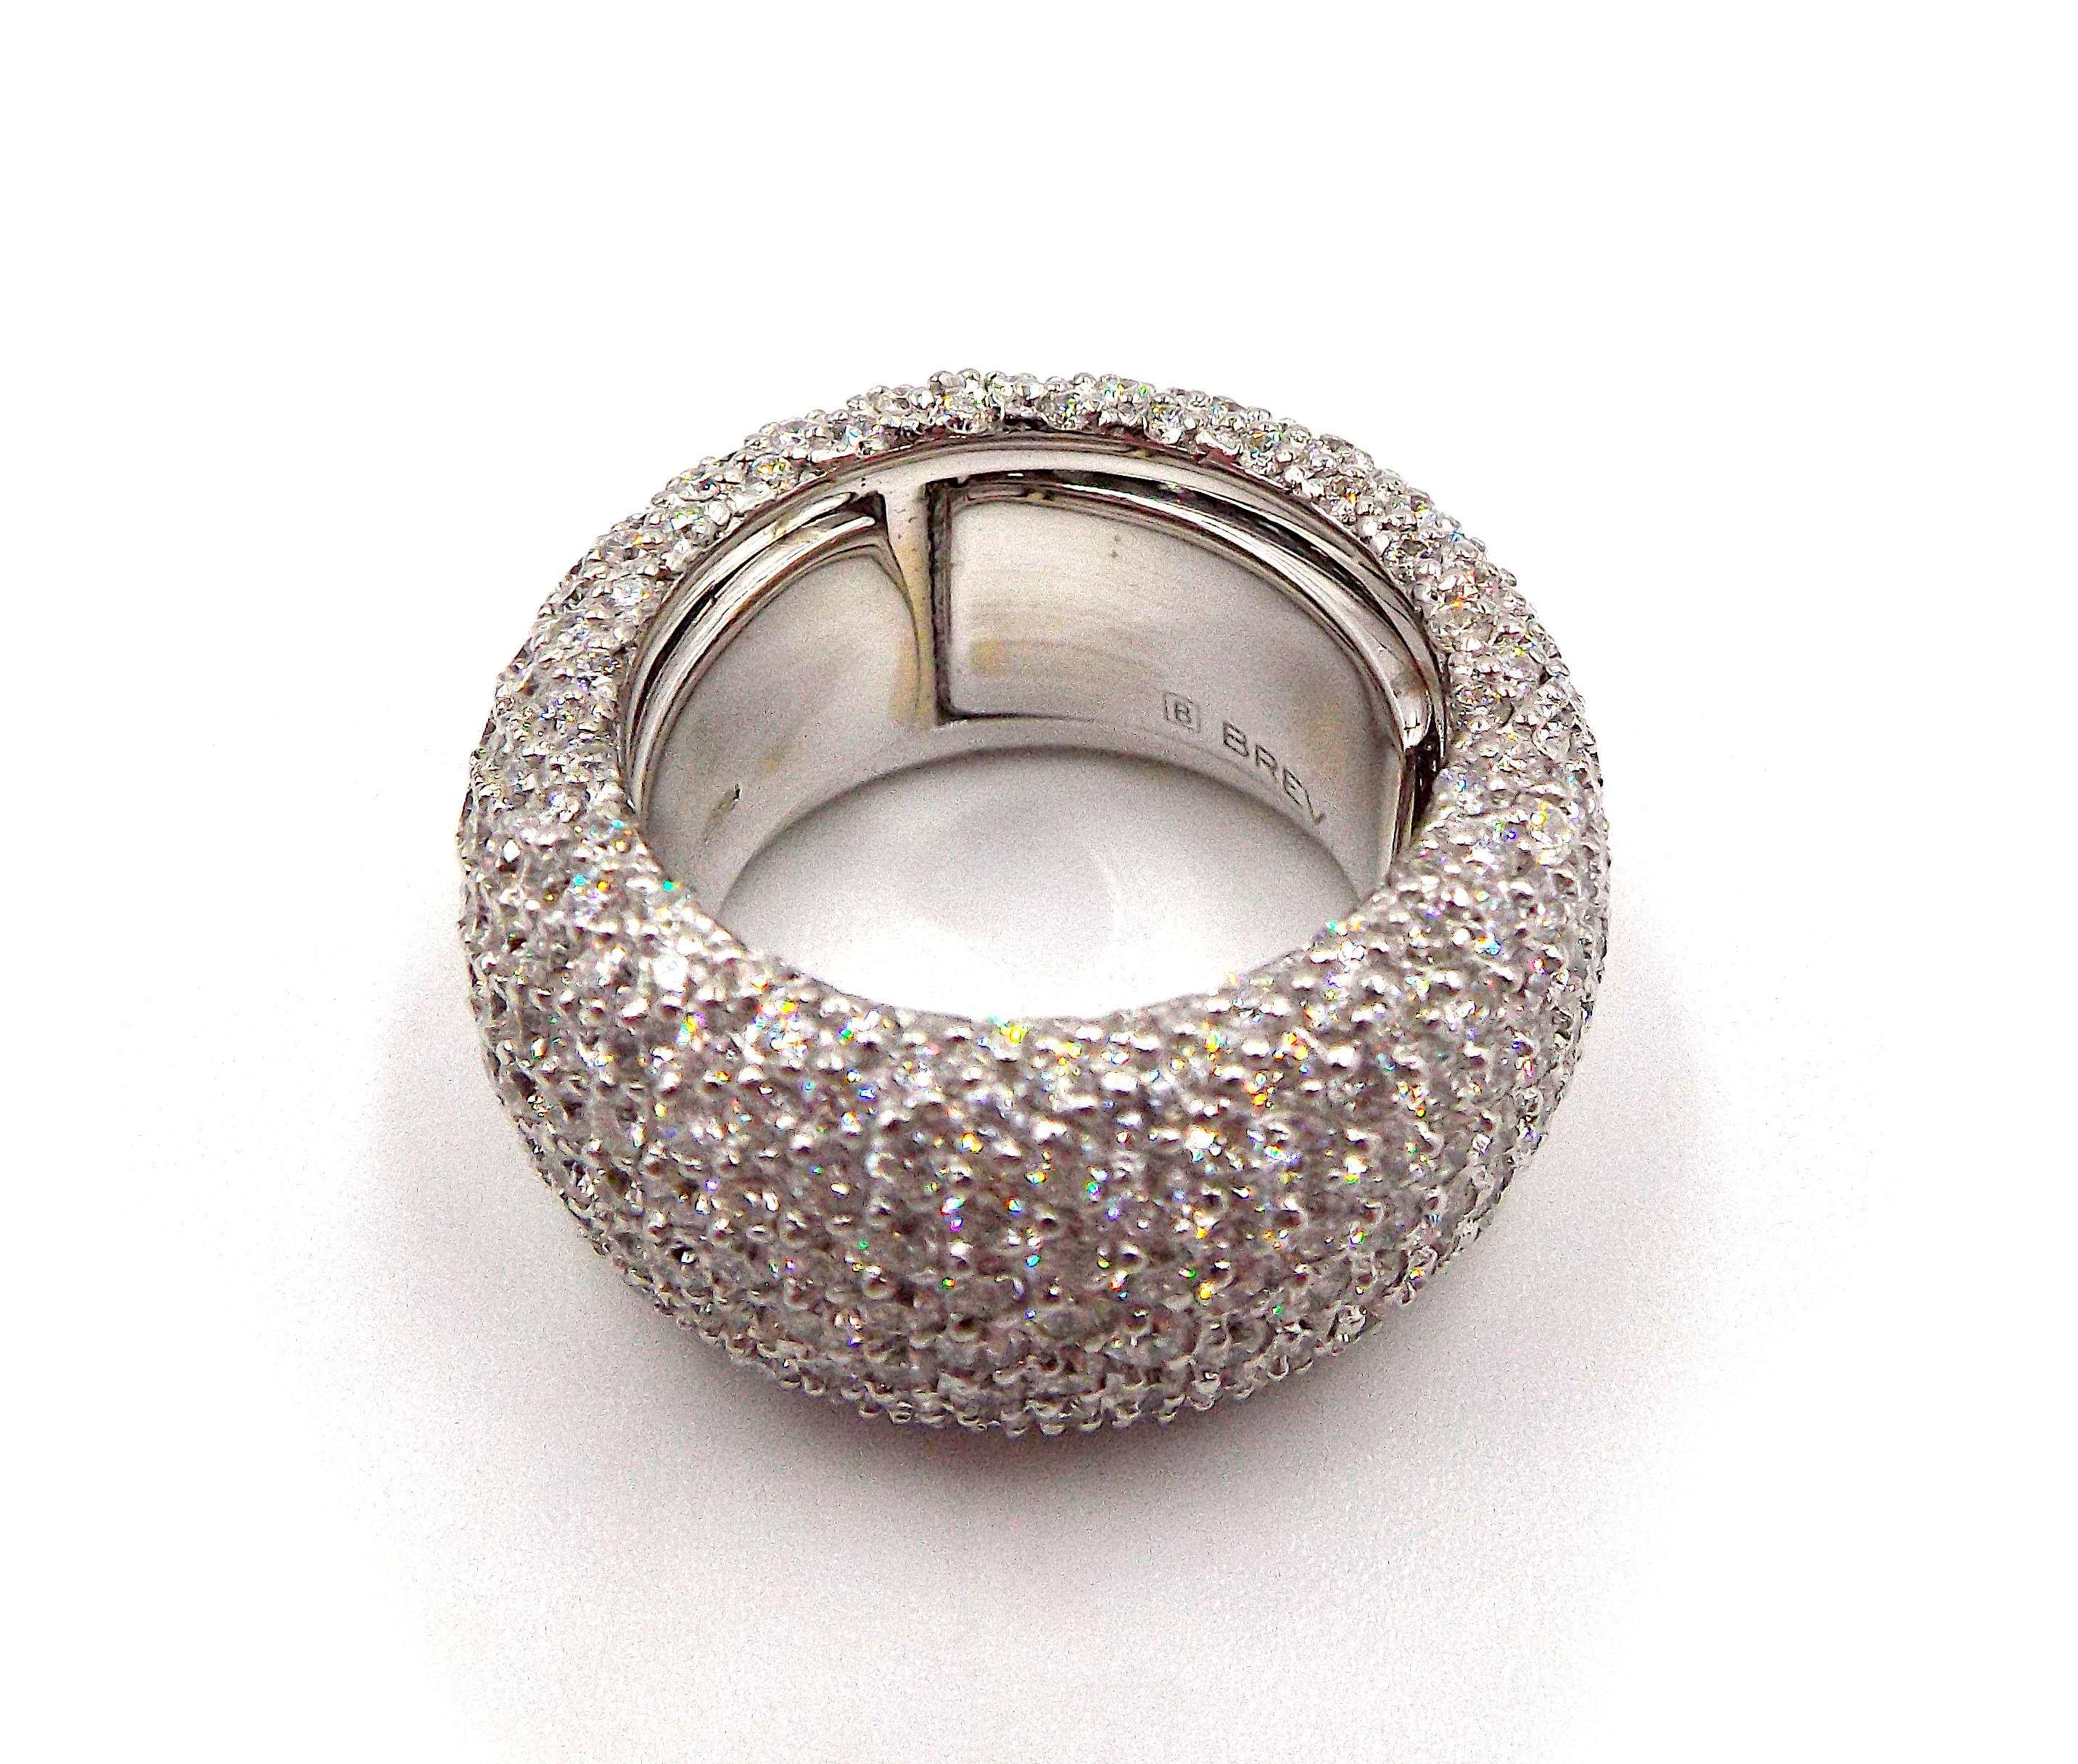 Roberto Demeglio 18K white gold and diamond ring from Cashmere collecton.
Item weight is 9.9dwt.
Diamond weight is 7.44ct.
Size 6.50 to 8 (adjustable).
Retail $21,290
The ring is pre-owned, in excellent condition.